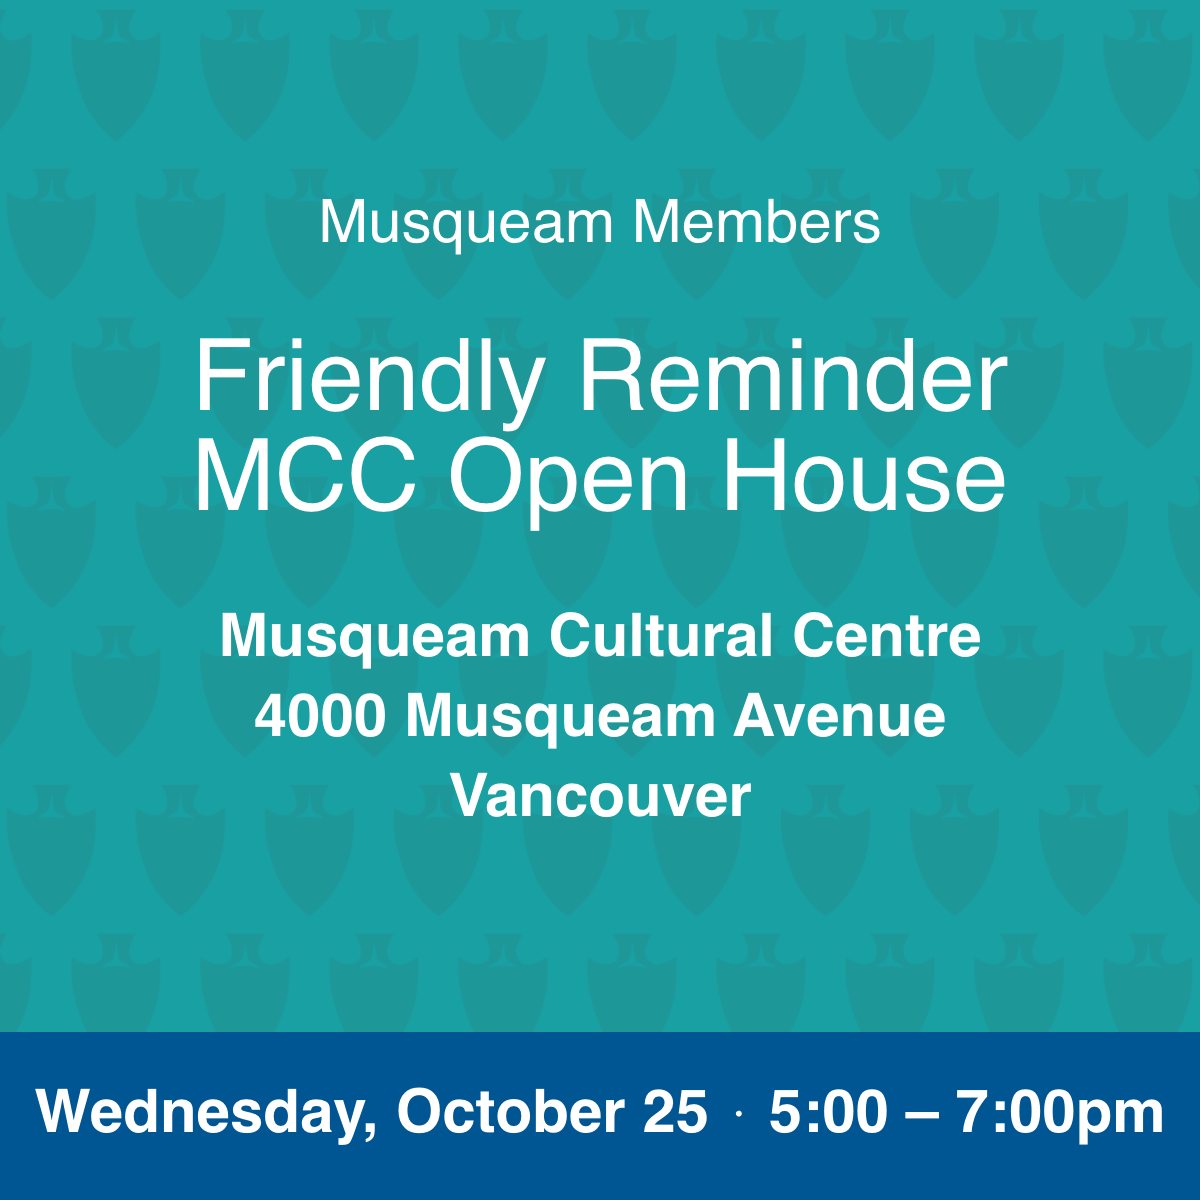 A friendly reminder to all our Musqueam Members to attend the MCC Open House and the Presentation of Audited Financial Statements. We look forward to seeing you!Wednesday, October 25th5:00 pm - 7:00 pmMusqueam Cultural Centre4000 Musqueam Avenue, VancouverEvent details in link in bio.#musqueamcapitalcorporation #musqueamcapital